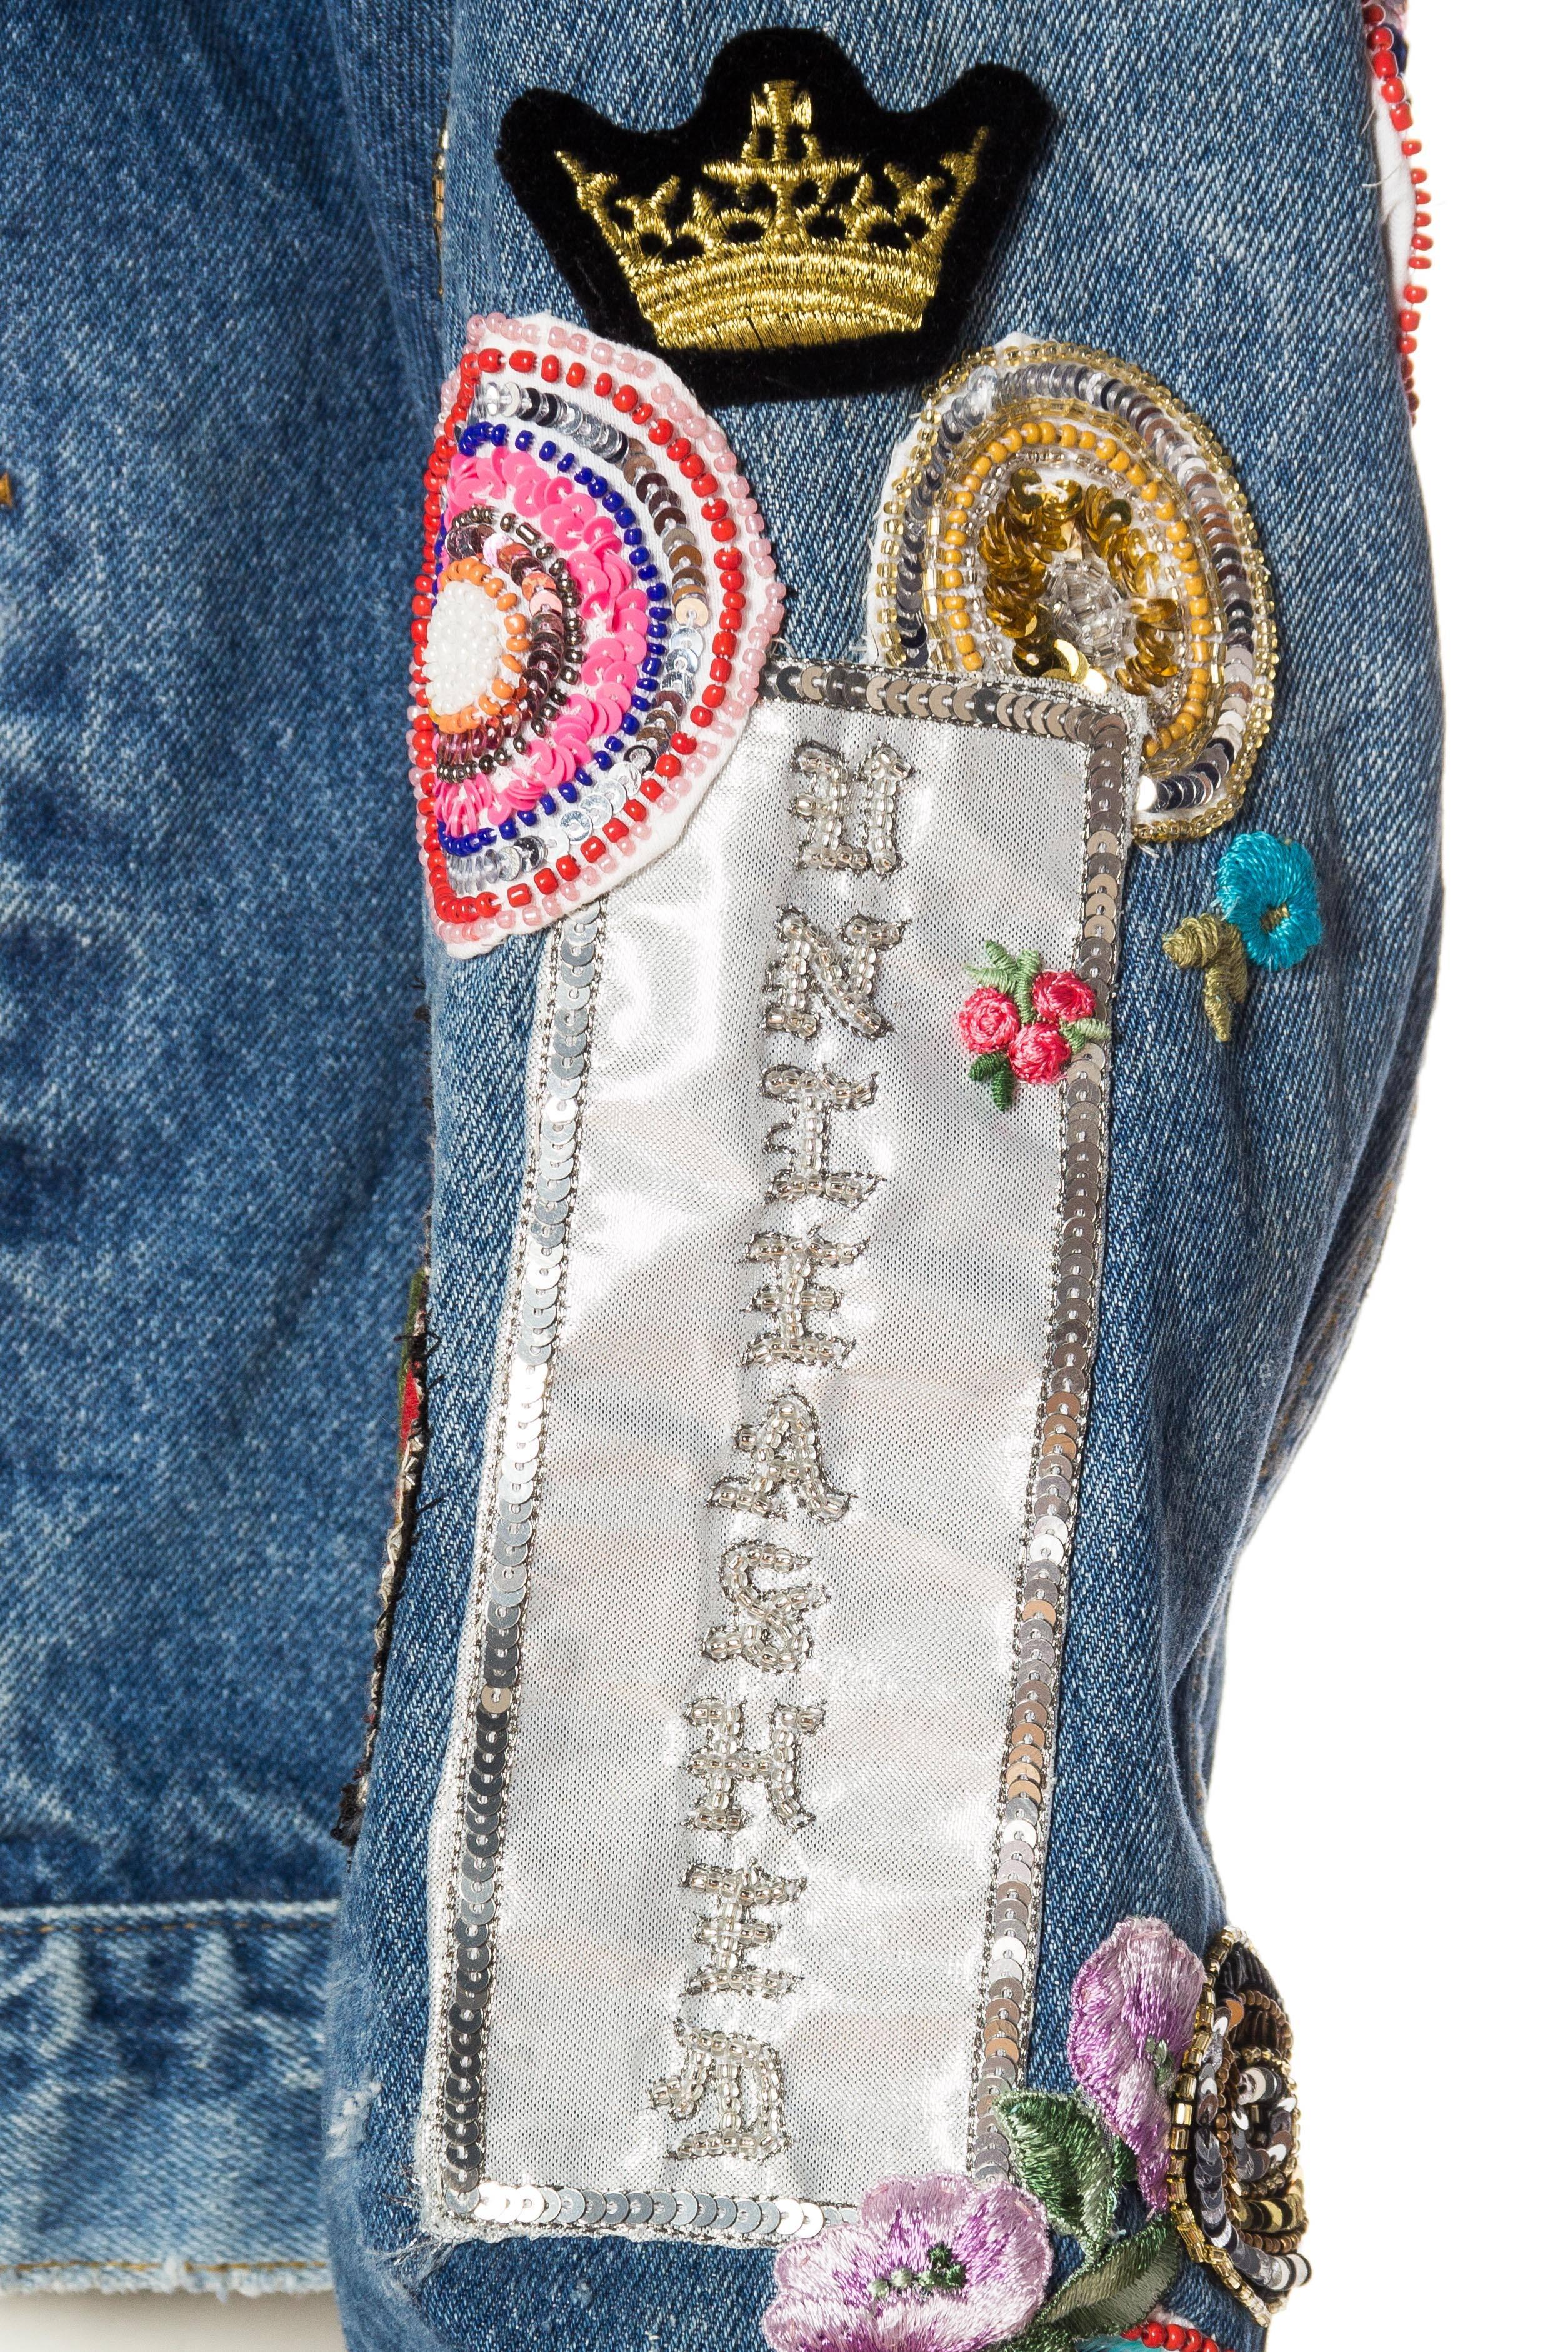 Gucci style embellished Levi jean jacket, Unleased collaboration 1